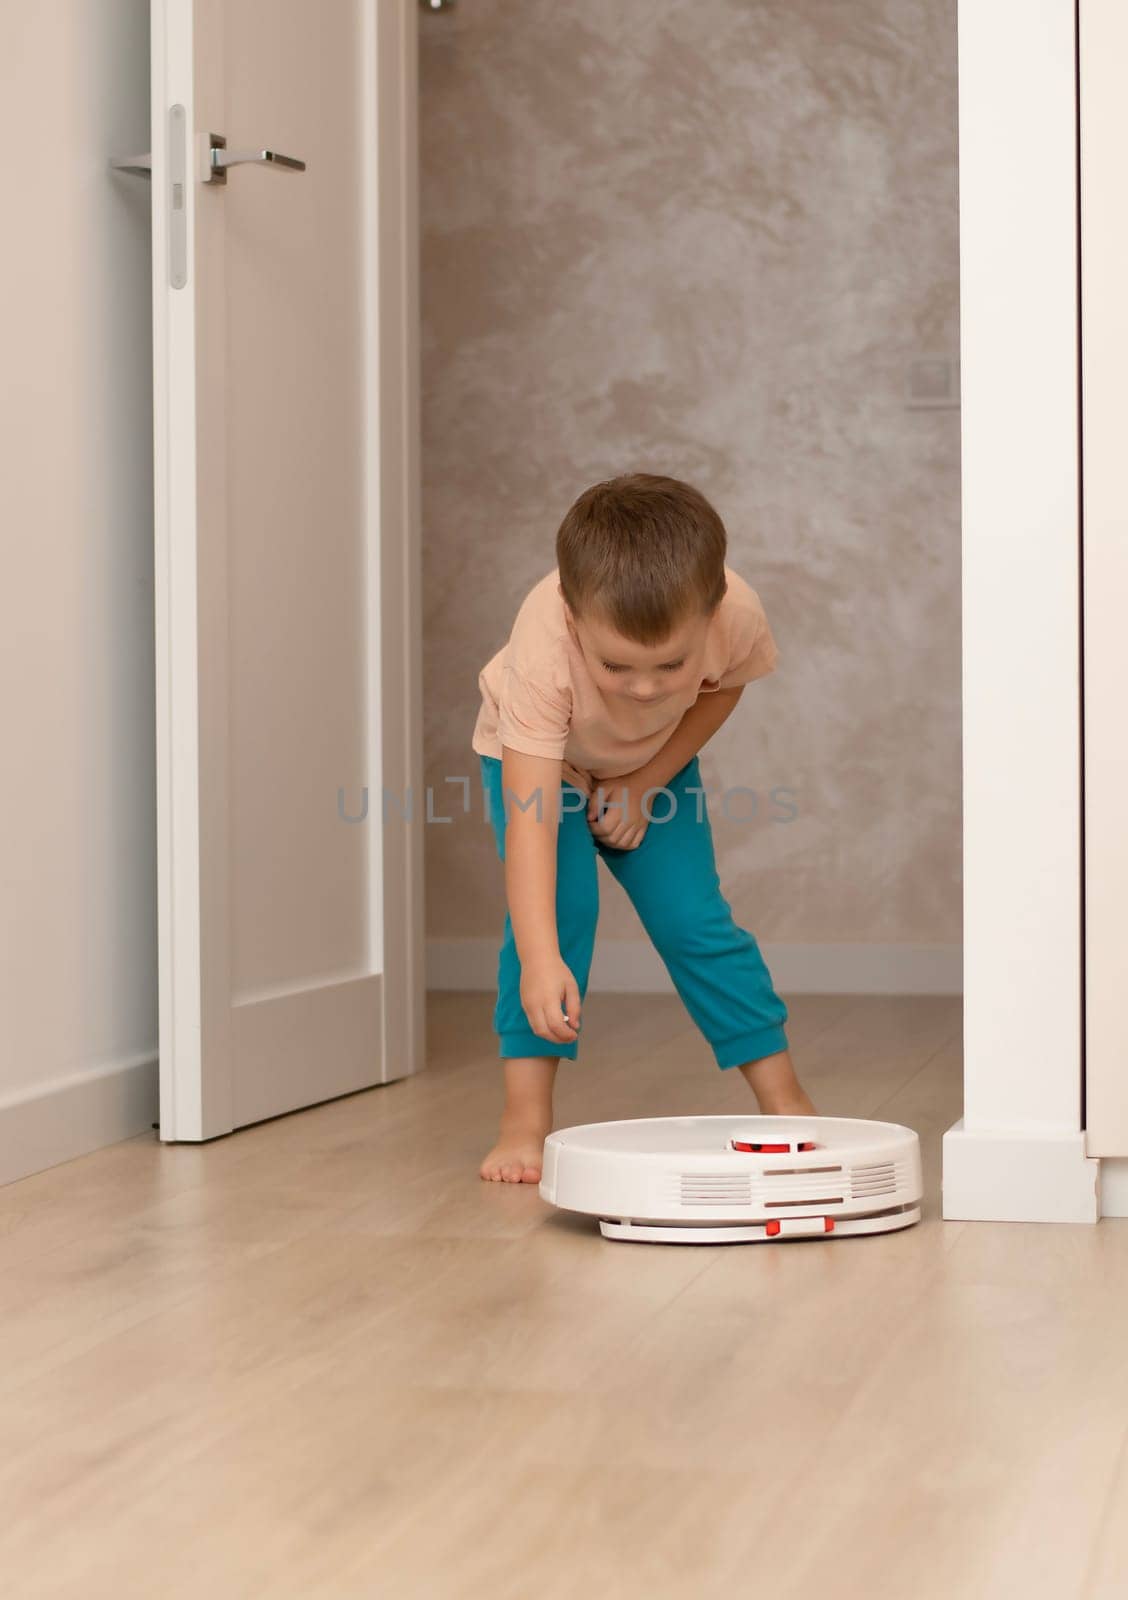 Cleaning concept. A little funny Caucasian boy, 4 years old, throws torn paper in small pieces onto the floor for cleaning and suction by a white robot vacuum cleaner. Plays happily in the home interior.